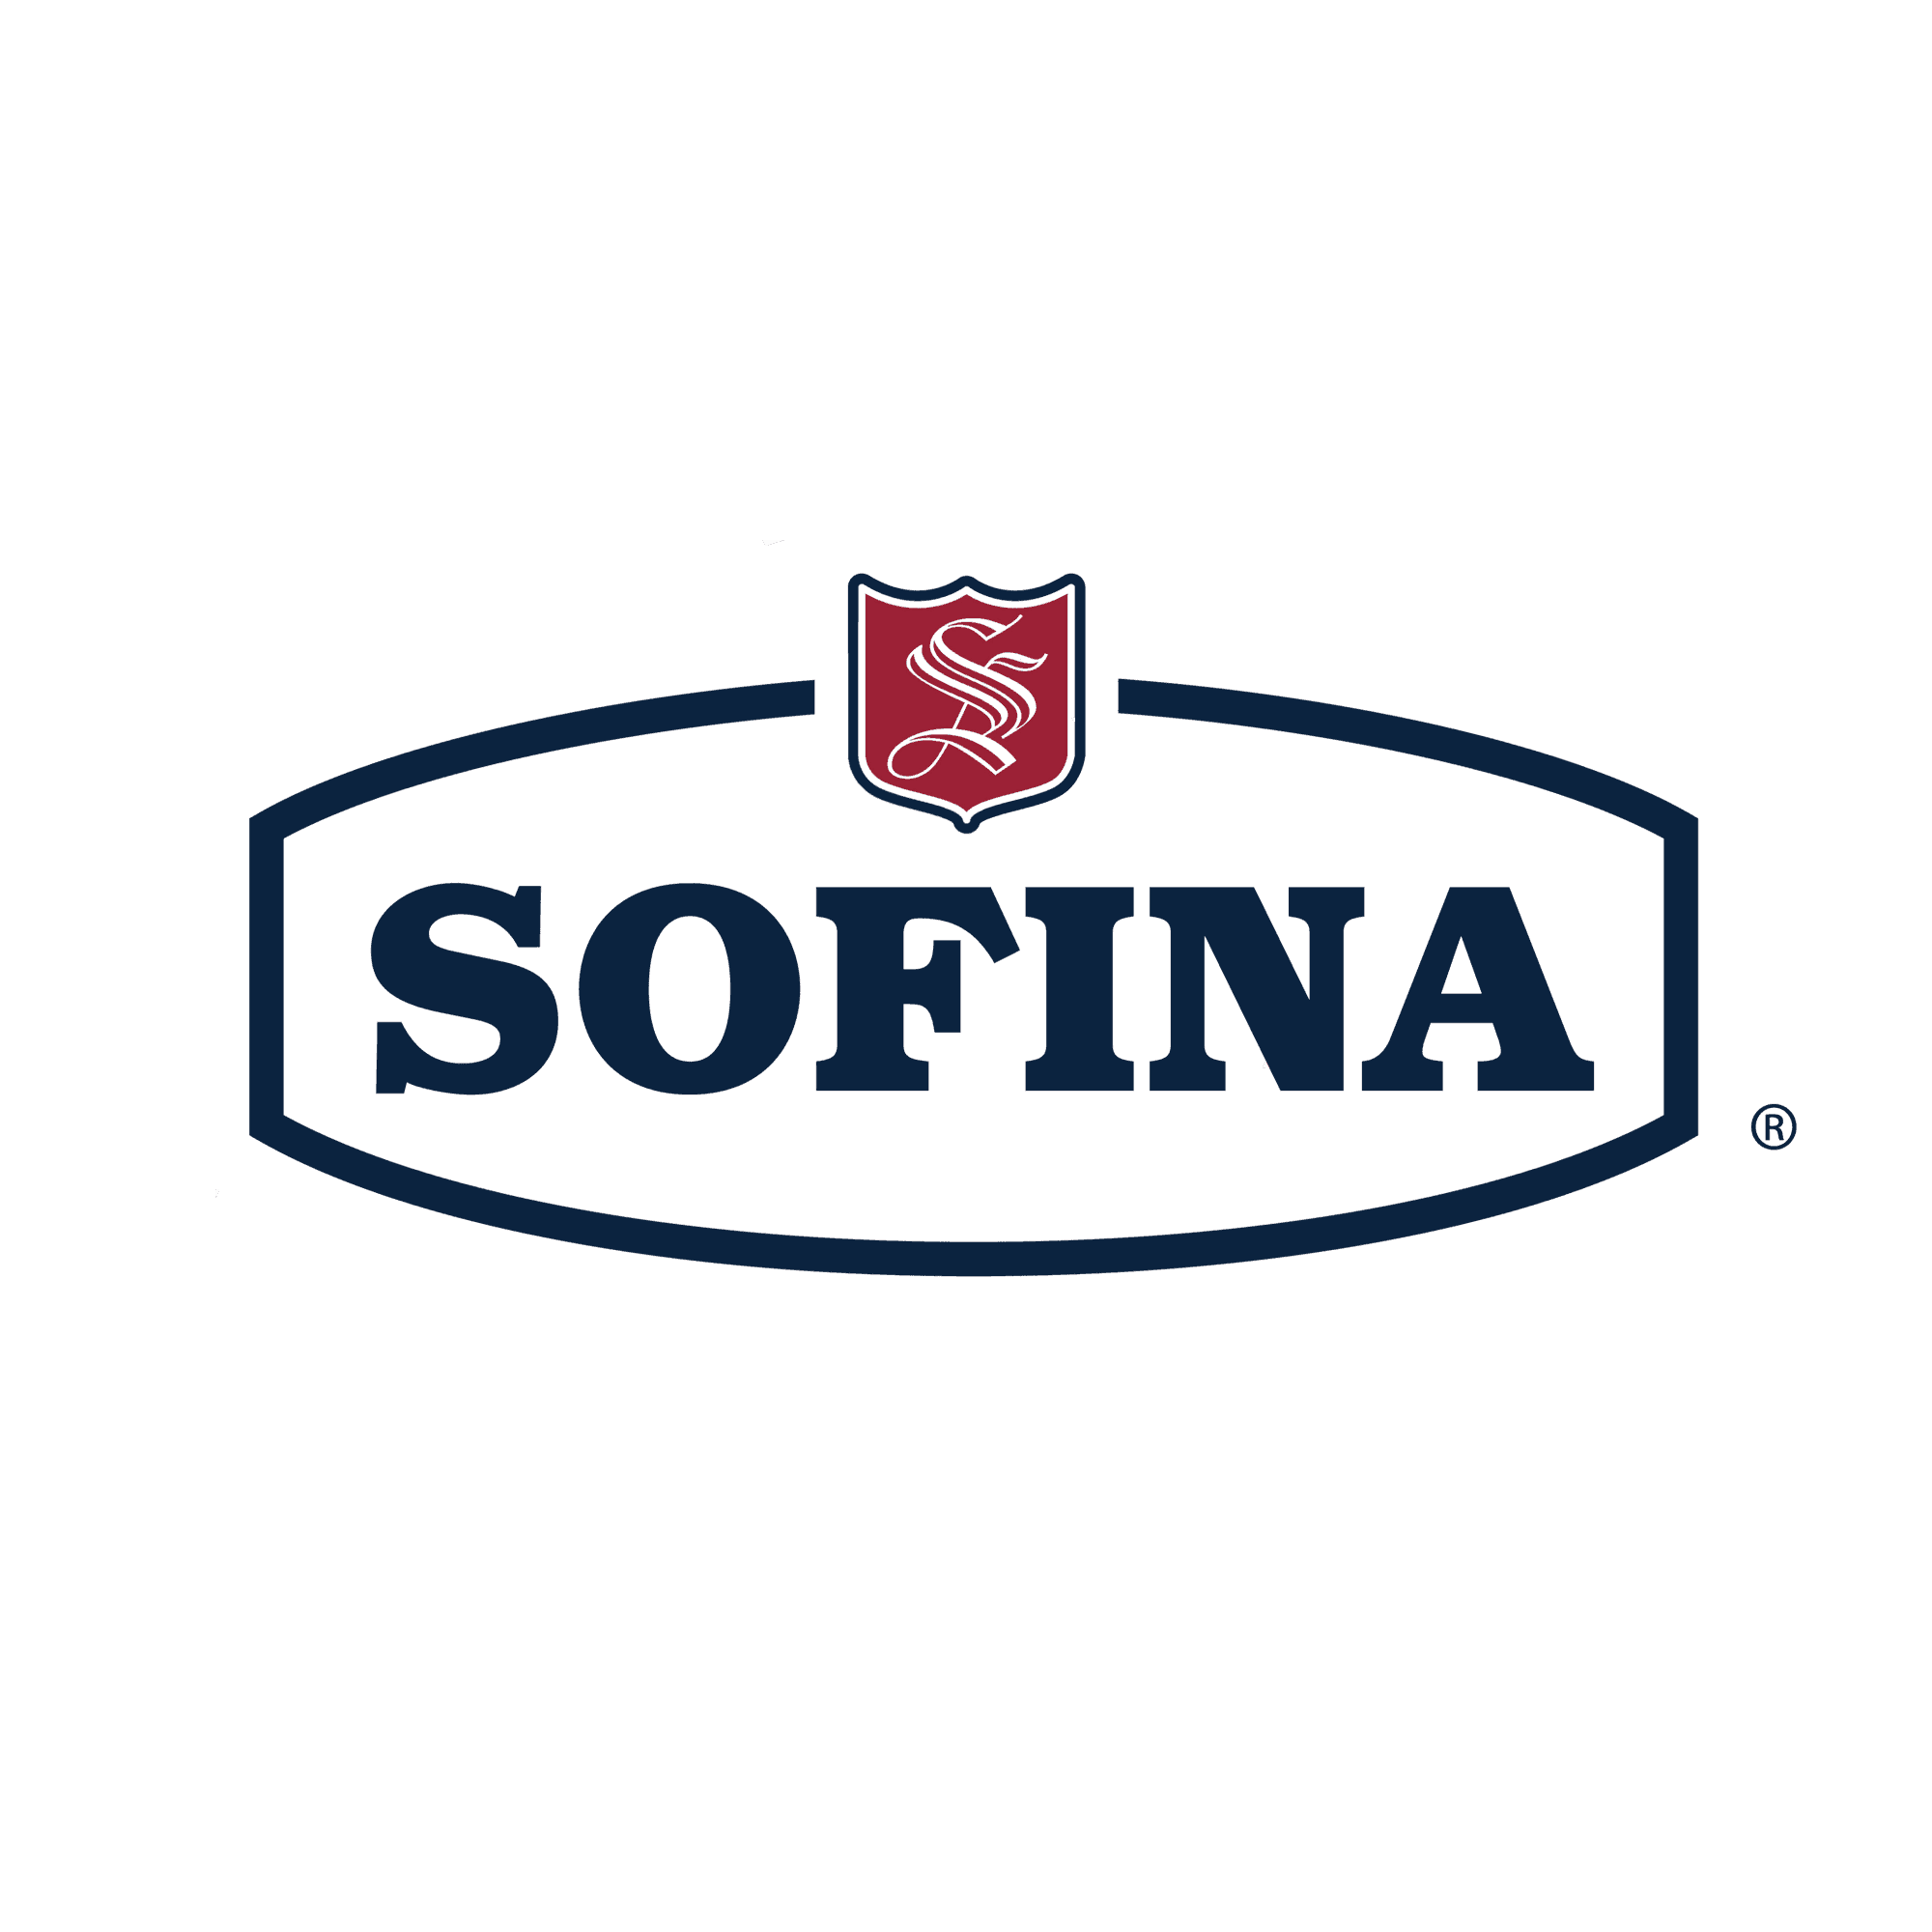 <p><em class="ql-size-small">Hors d'Oeuvres Sponsor:</em></p><p><span class="ql-size-small">Sofina Foods</span></p> logo